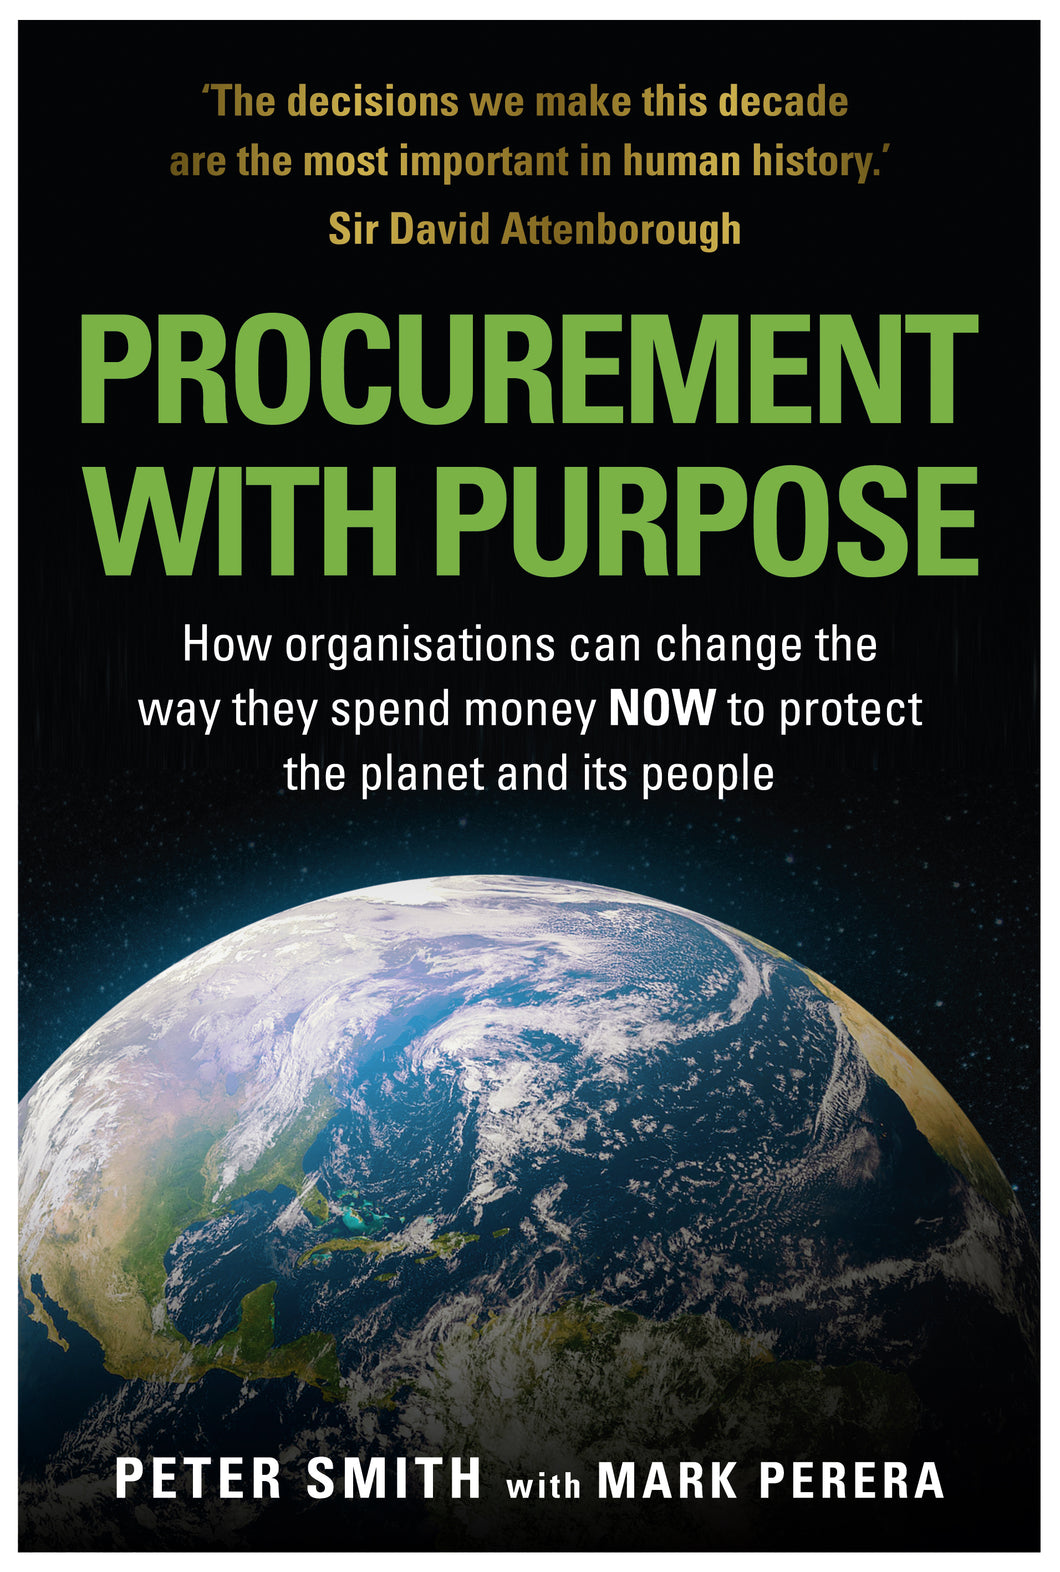 Procurement with Purpose: How organisations can change the way they spend money NOW to protect the planet and its people  - Peter Smith with Mark Perera